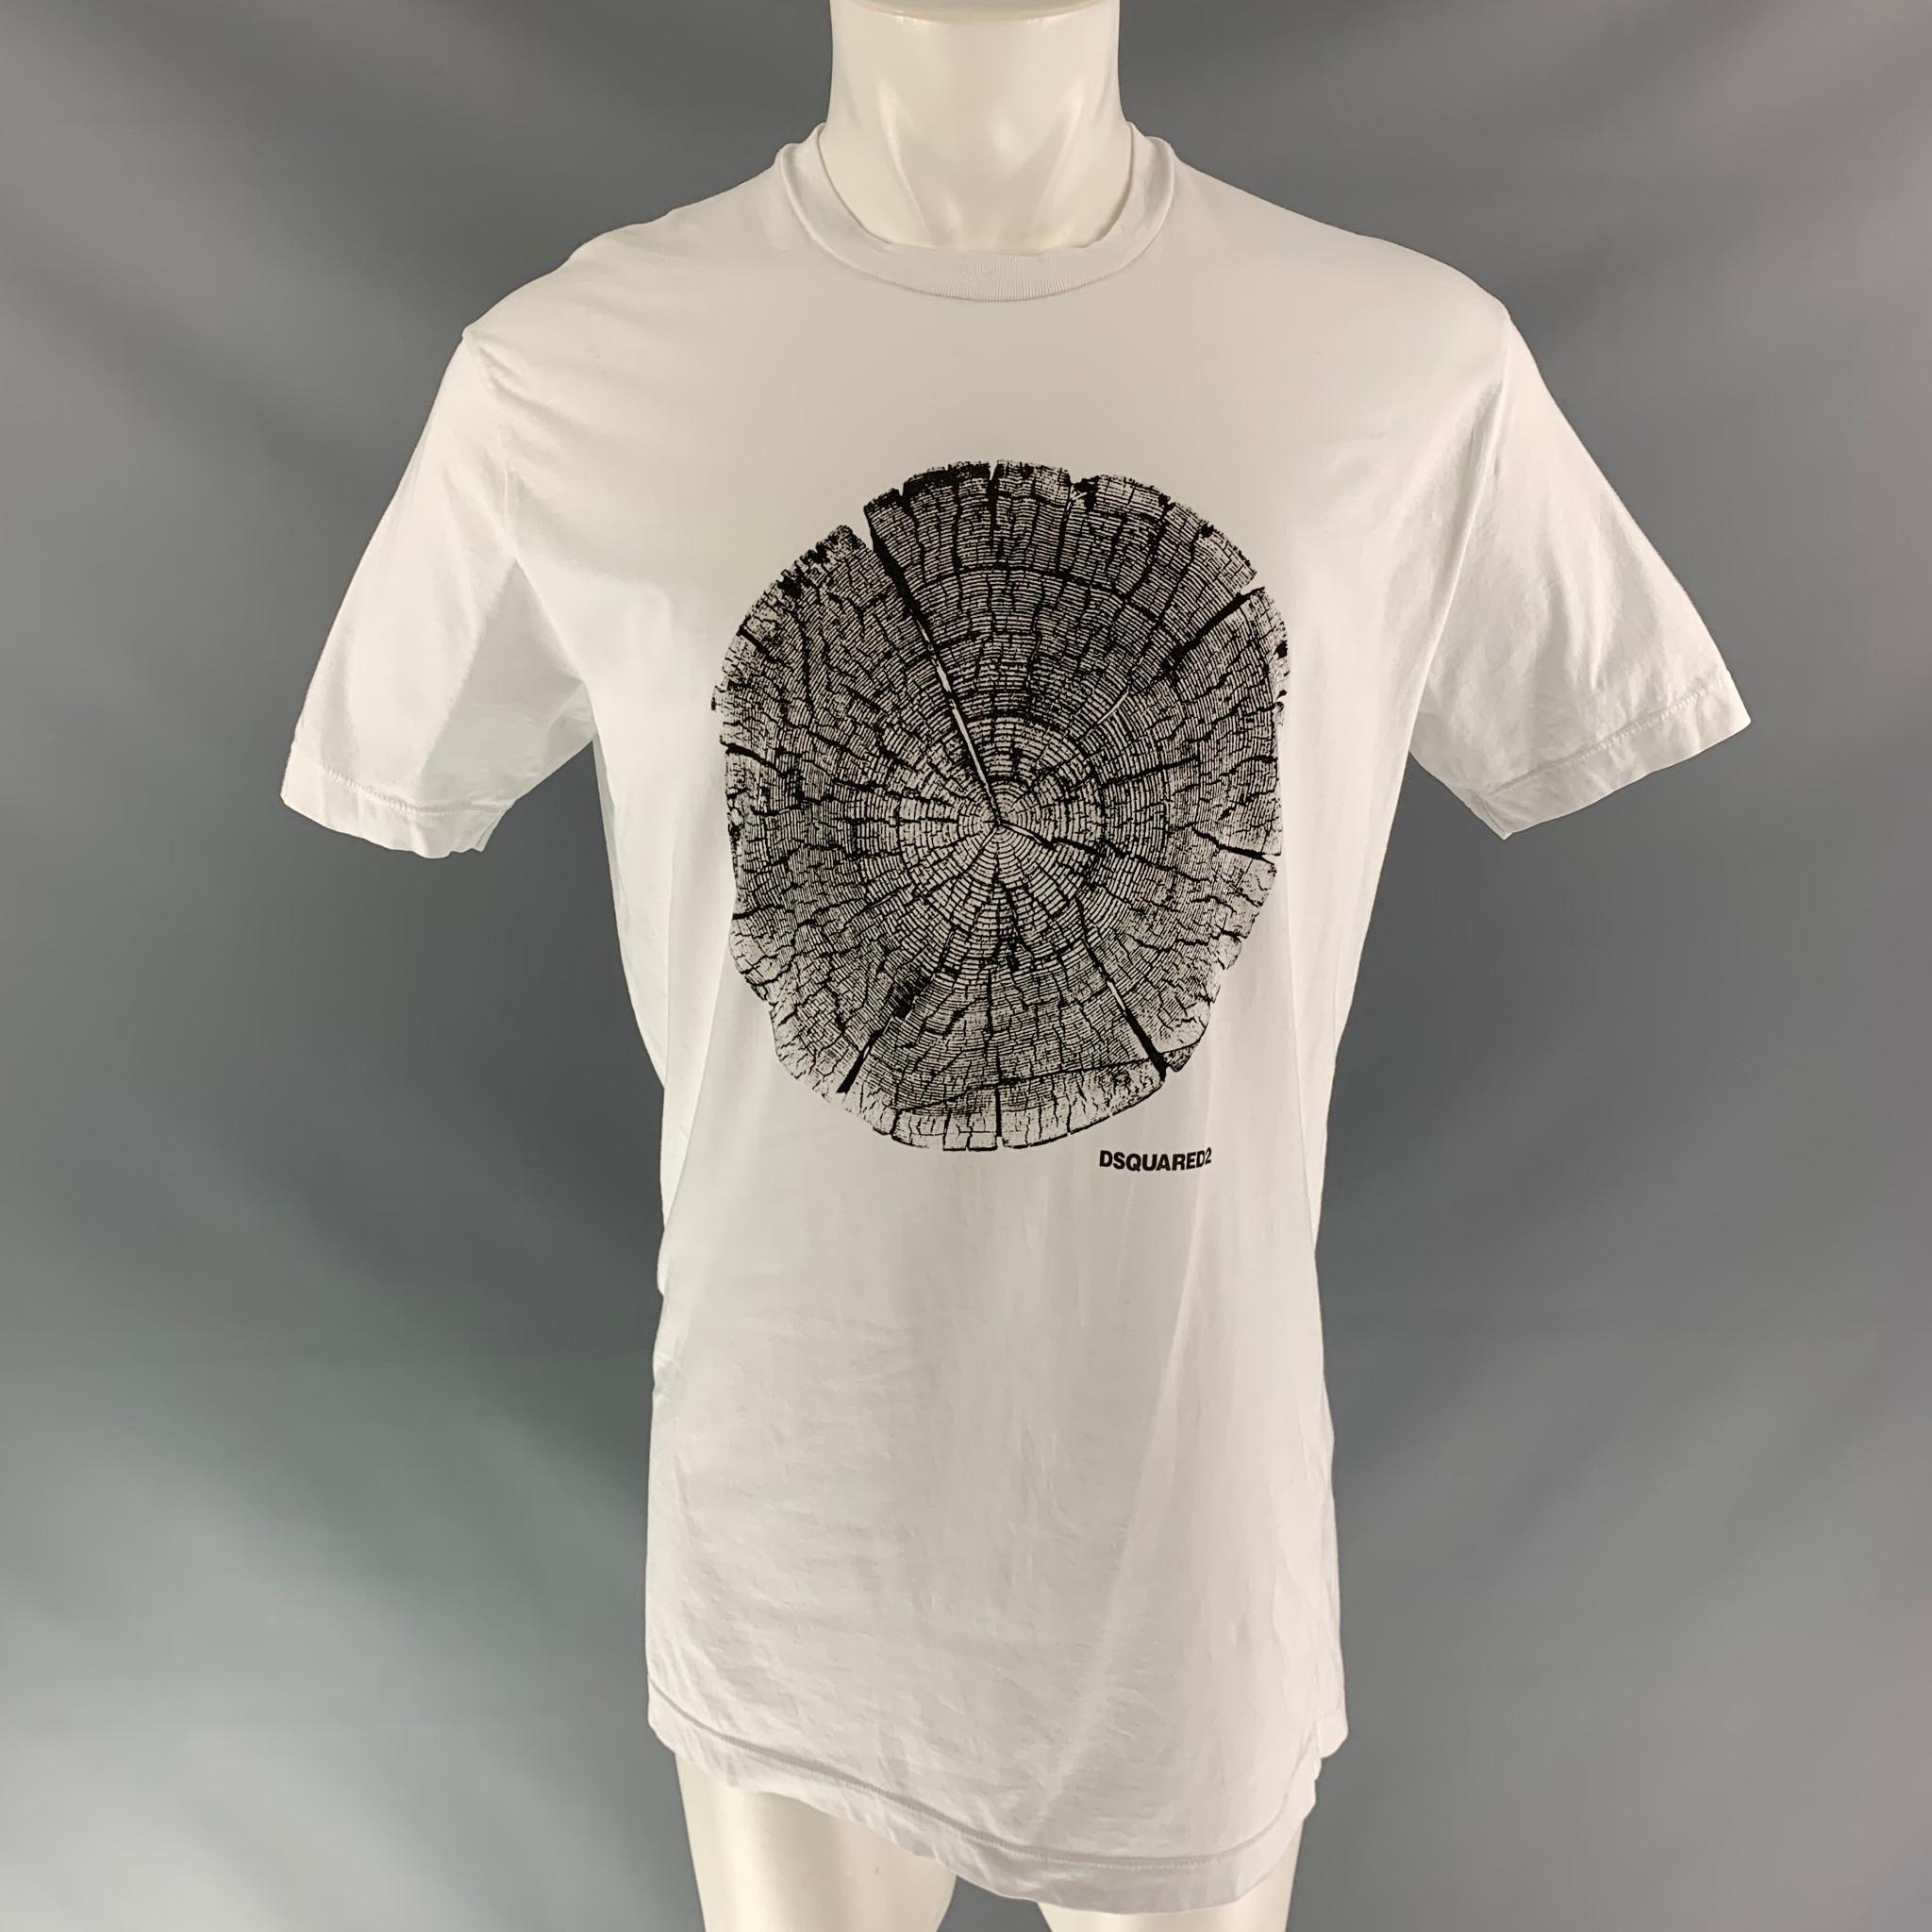 DSQUARED2 short sleeve t-shirt comes in white cotton, black and grey tree trunk graphic art at center front and a round collar. Made in Italy.

New with Tag.
Marked: L

Measurements:

Shoulder: 19 in
Chest: 45 in
Sleeve: 9 in
Length: 31 in